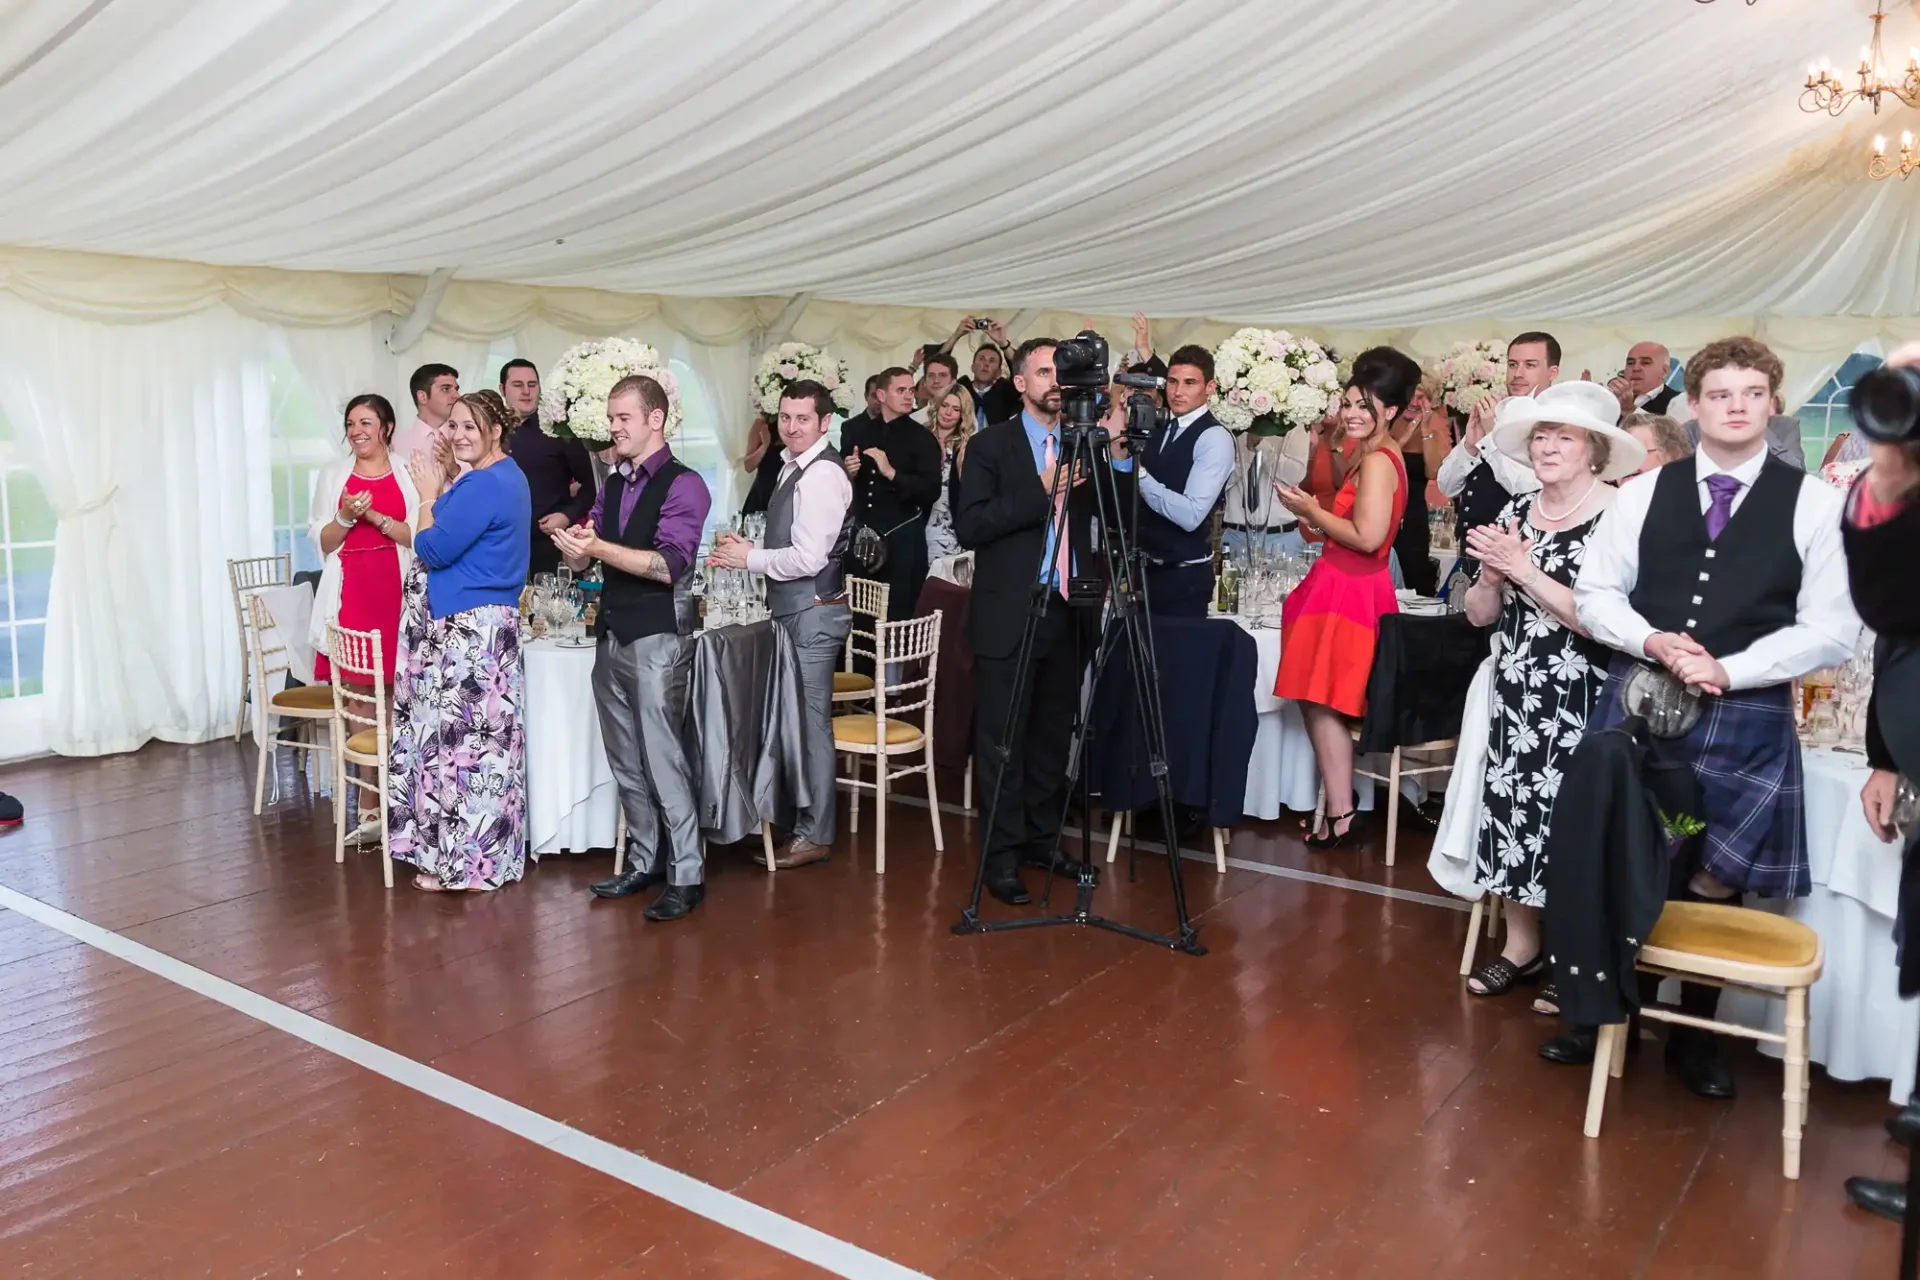 Guests at a wedding reception standing and watching an event inside a marquee, some holding cameras.